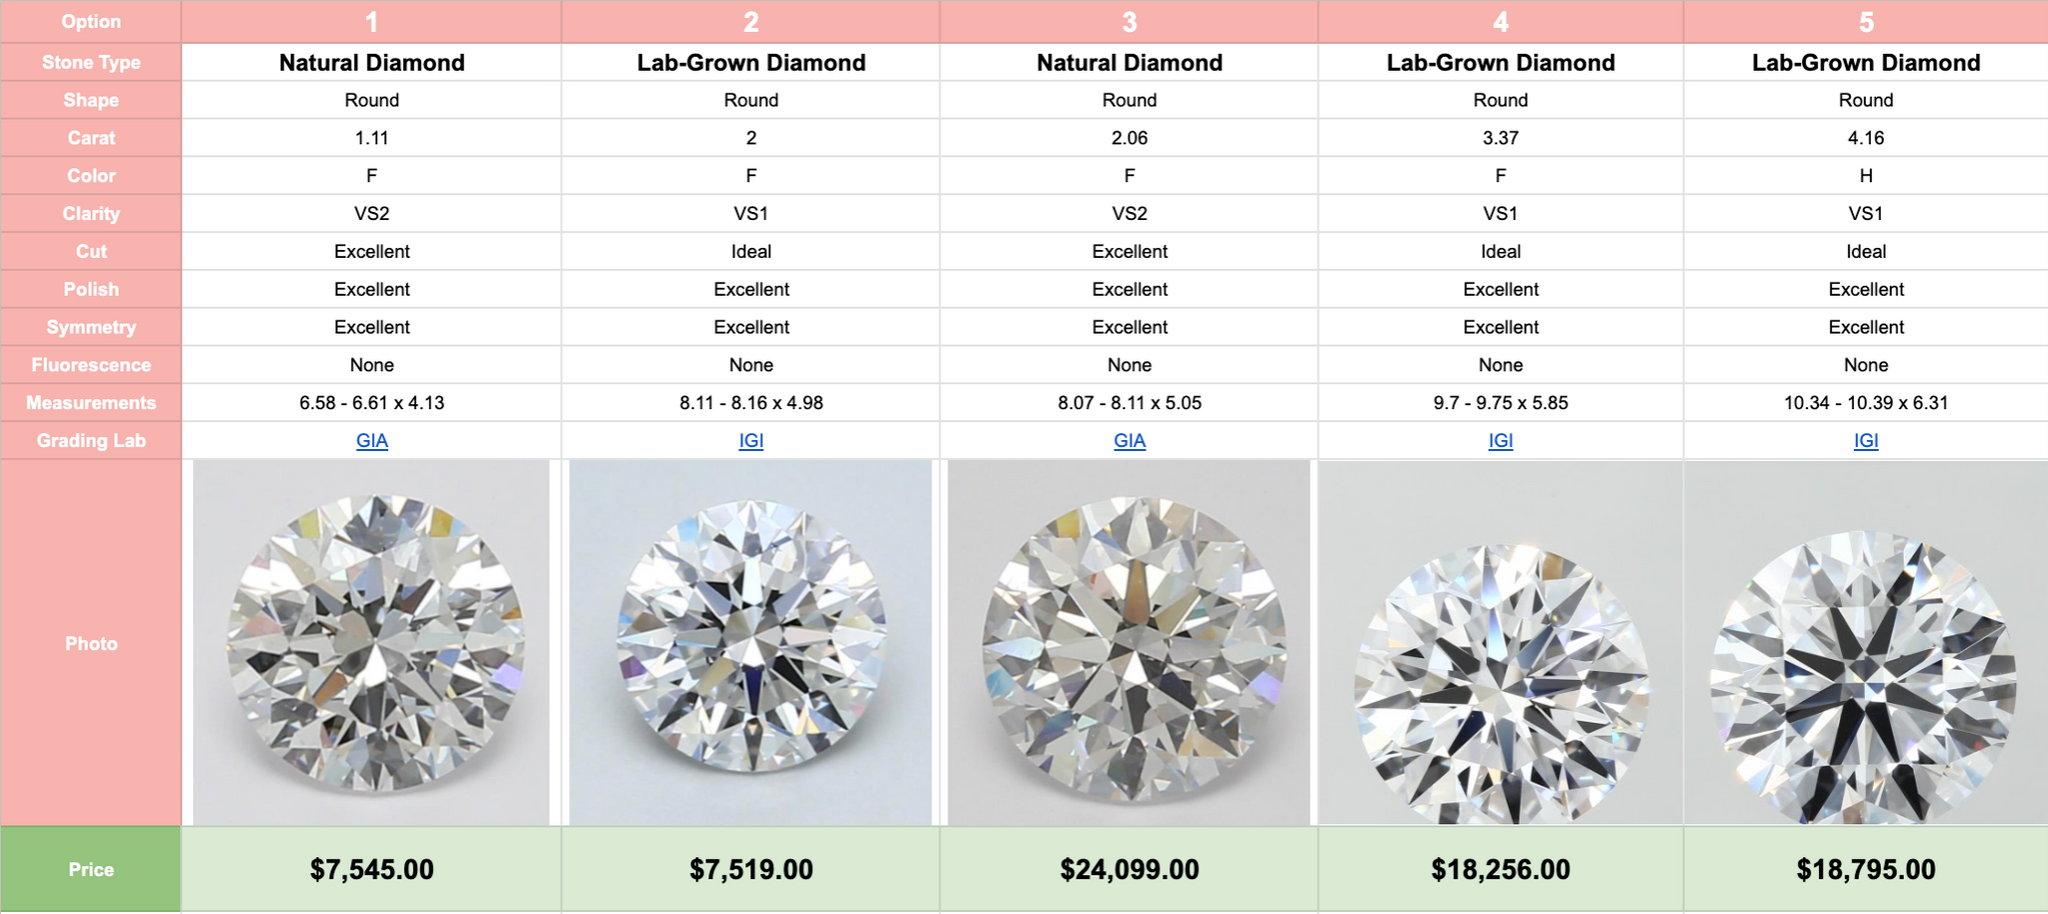 What is the difference between lab-grown diamond and natural diamond